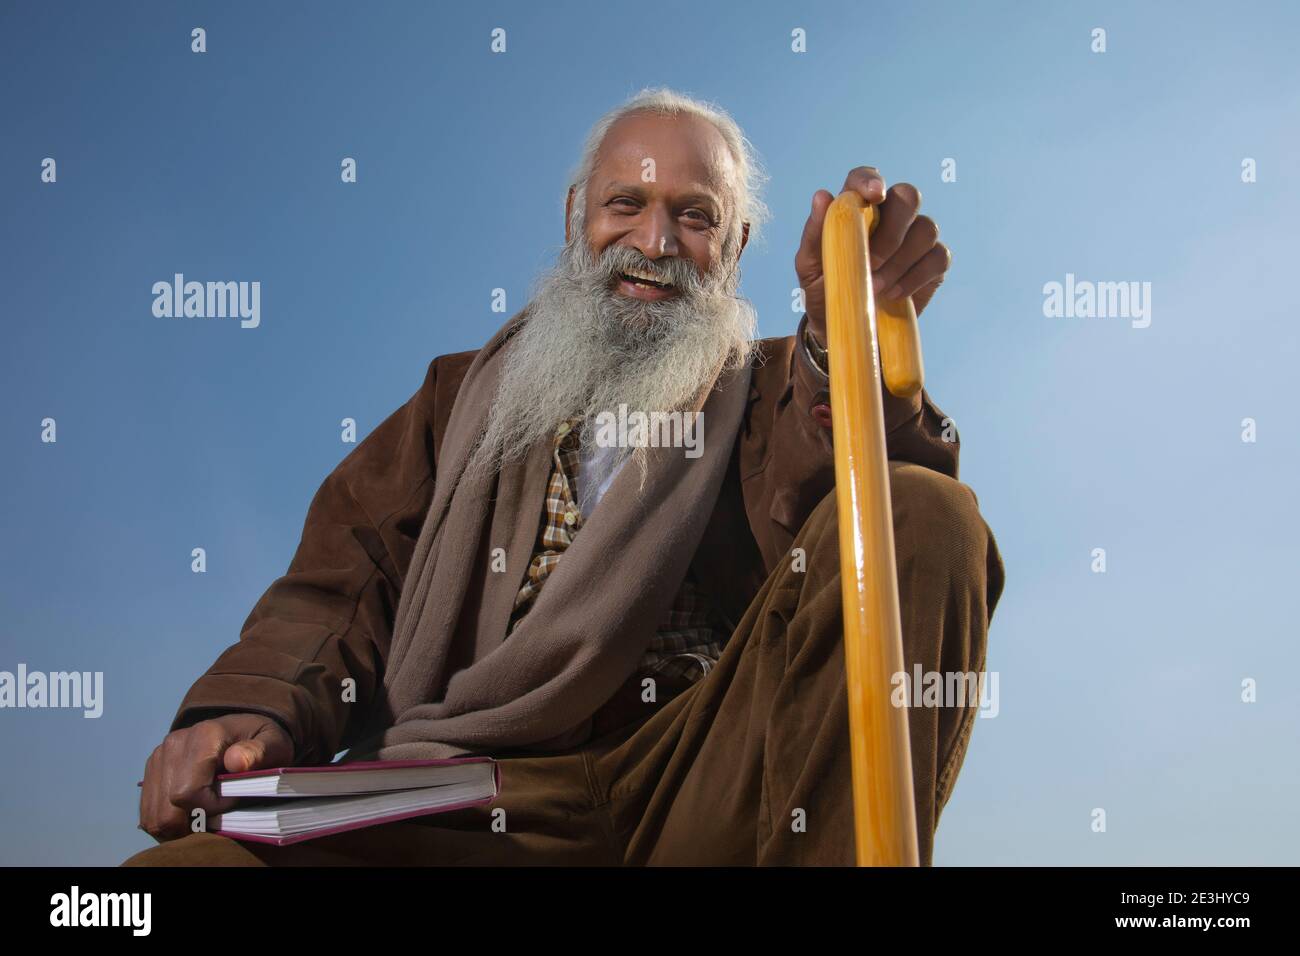 A BEARDED OLD MAN HAPPILY SITTING WITH BOOK IN ONE HAND Stock Photo